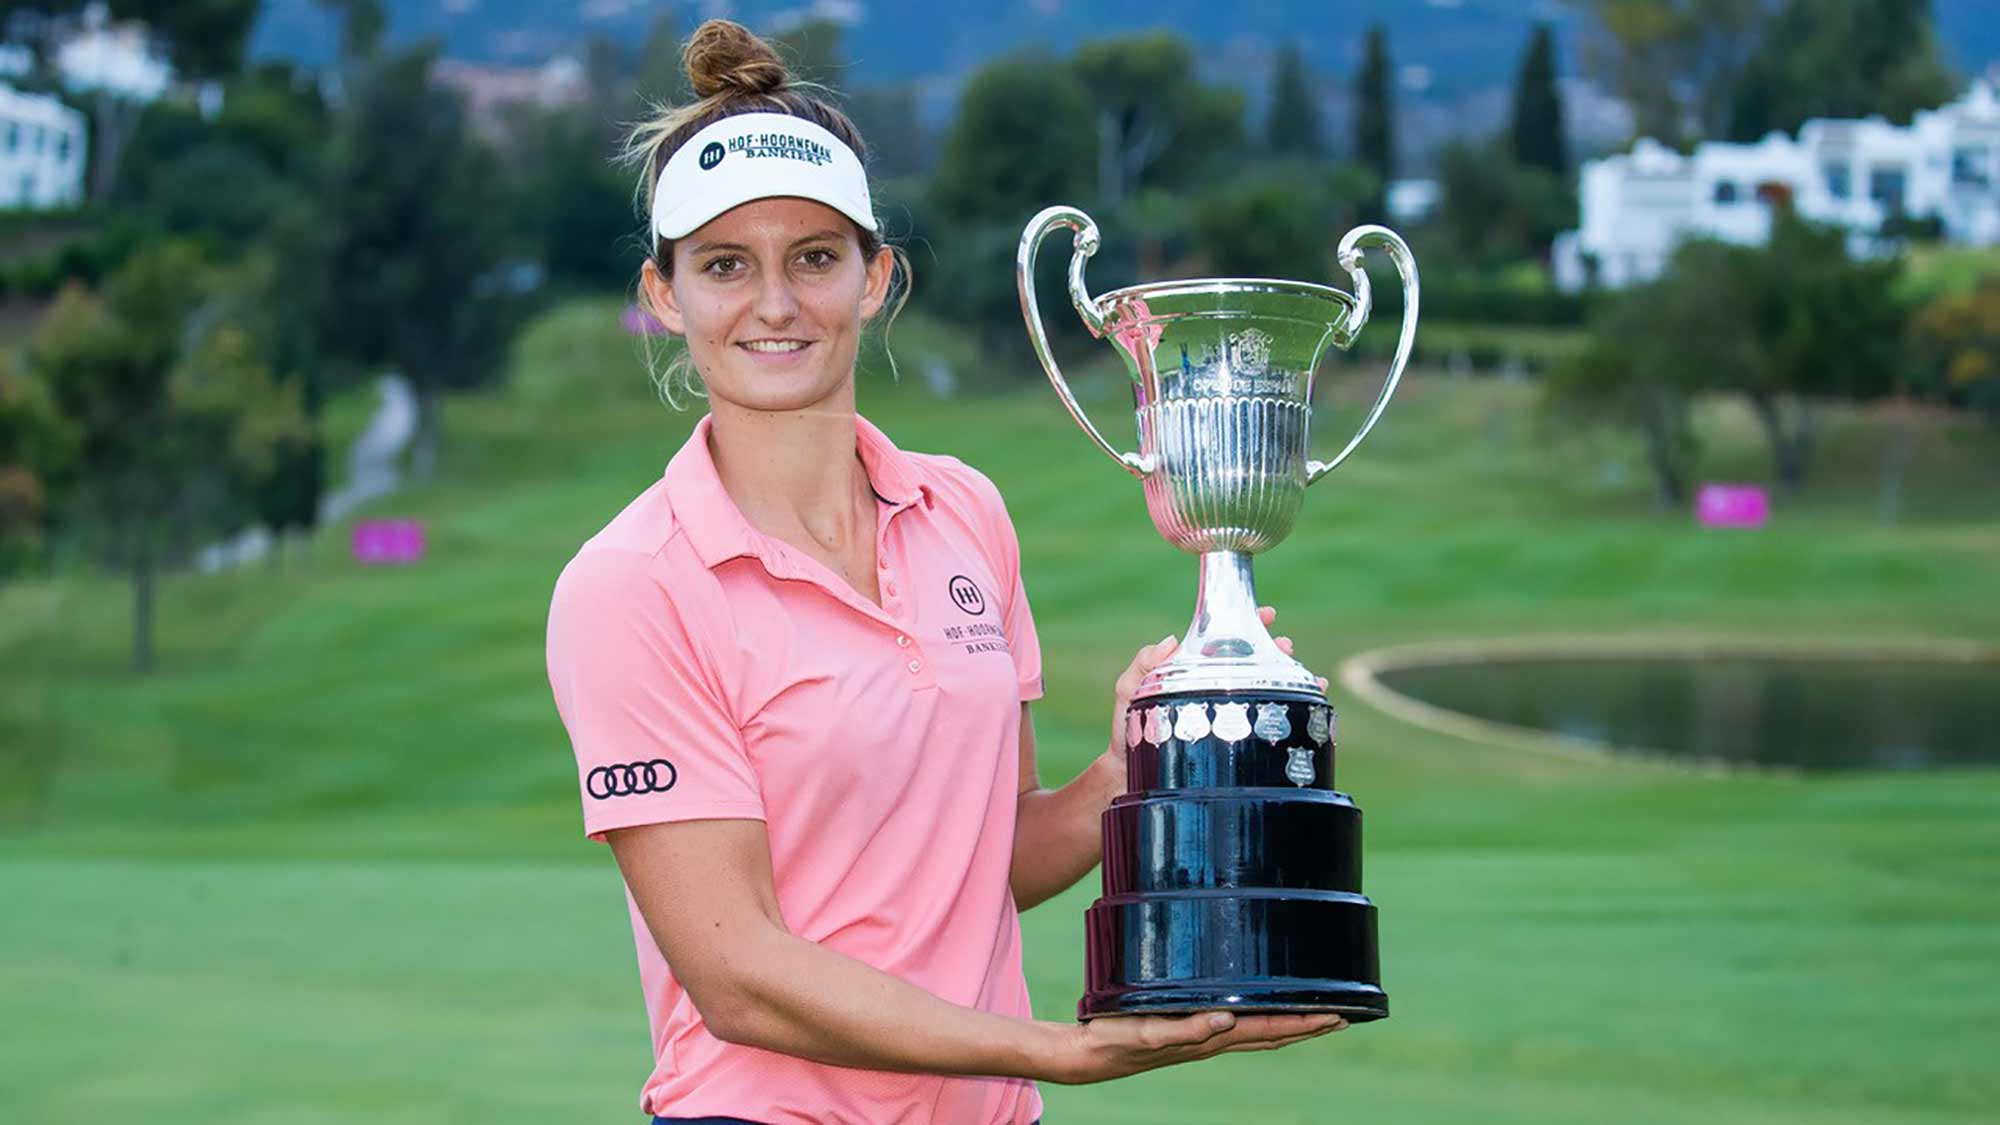 Anne van Dam poses with the trophy after successfully defending her title at the Andalucia Costa del Sol Open de Espana on the Ladies European Tour